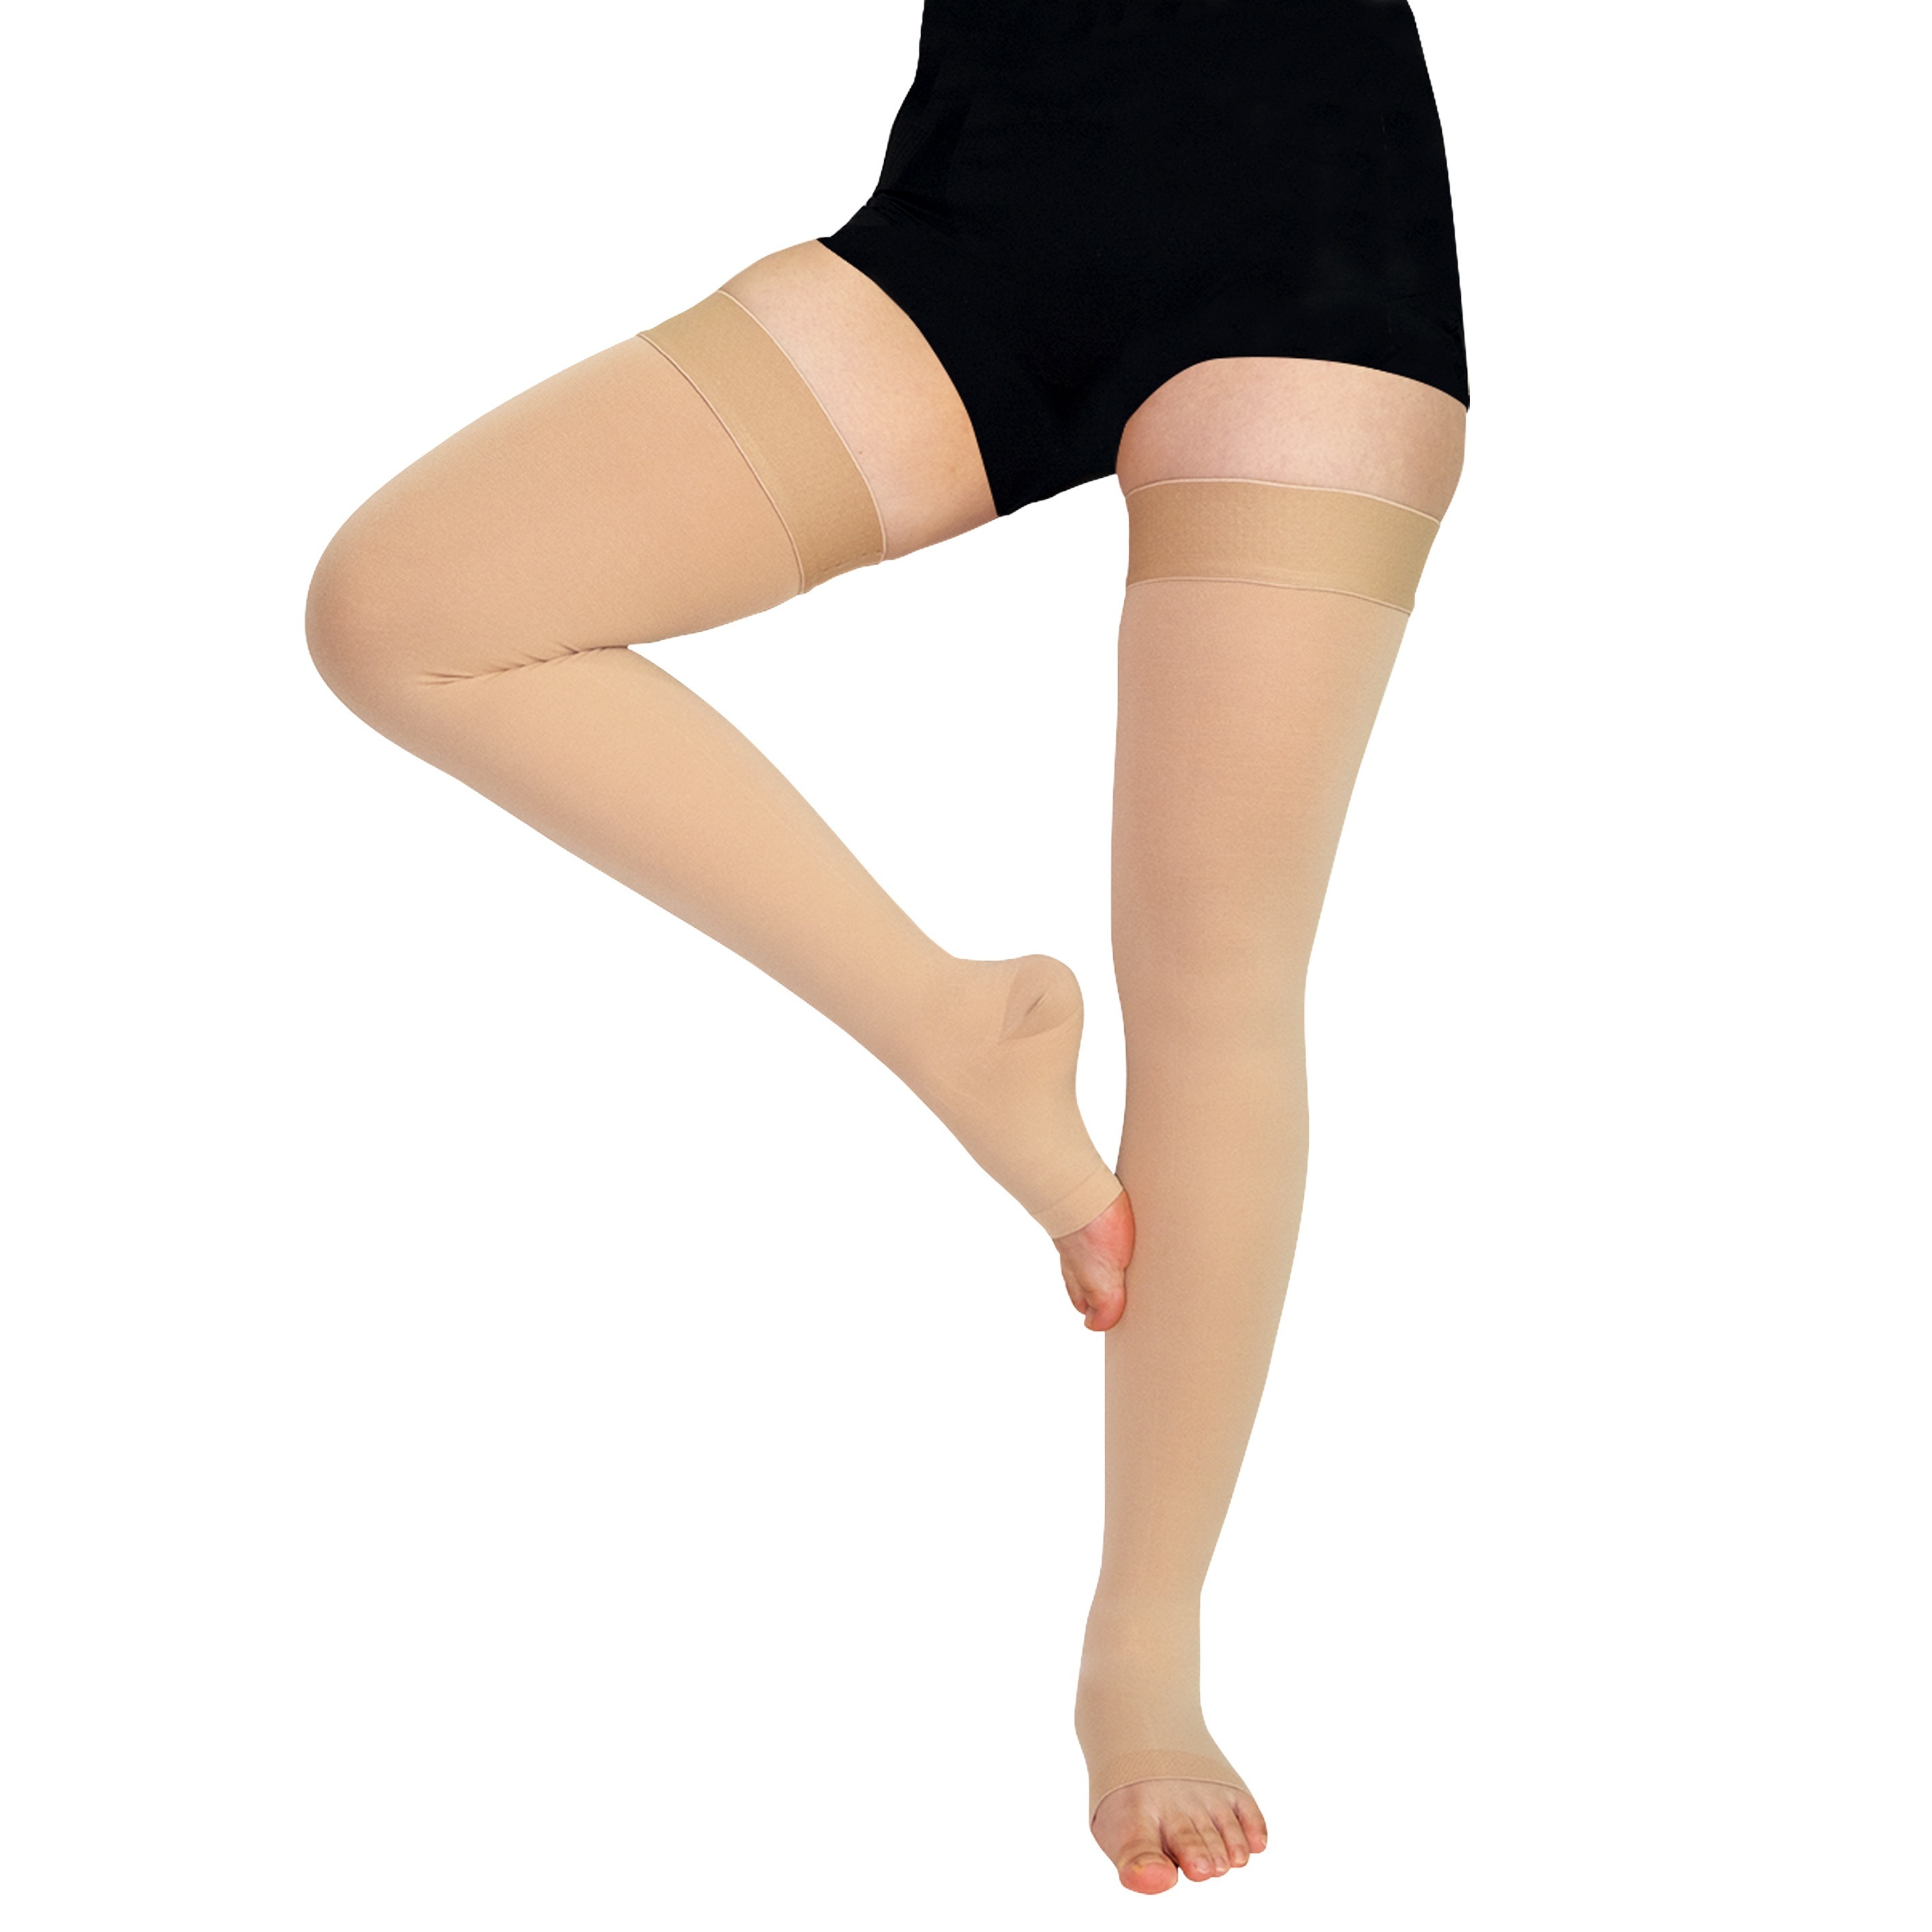 Thigh High Compression Stockings for Varicose Veins 20 30 mmhg